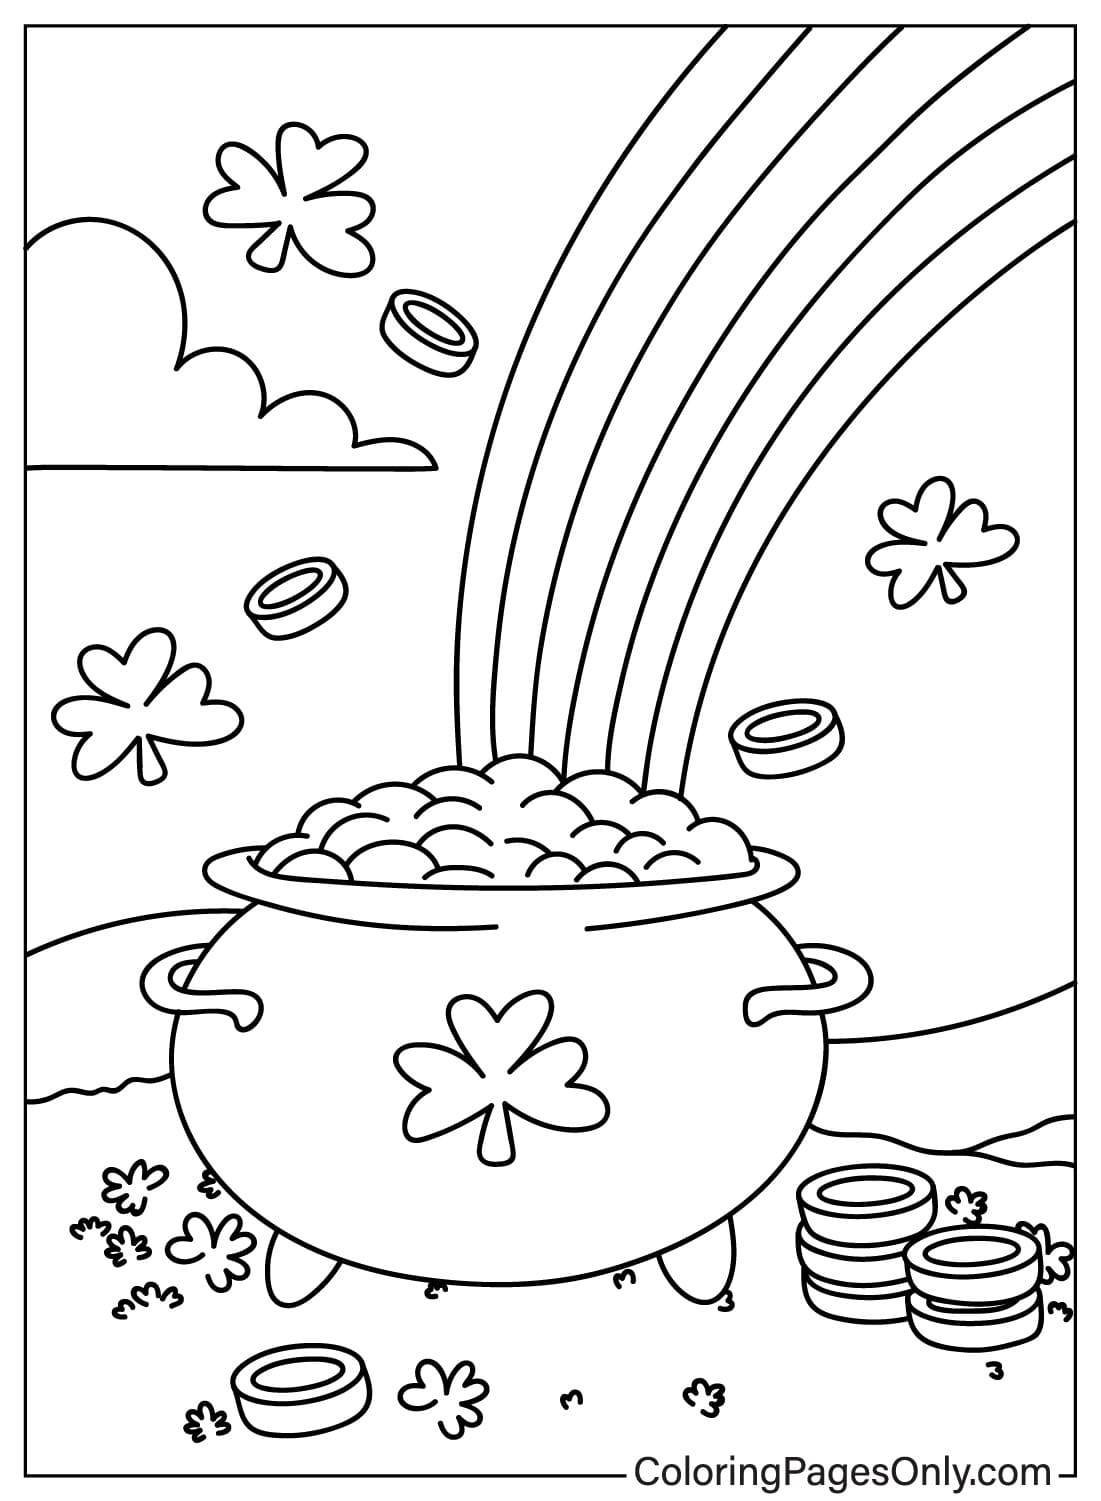 Print Pot of Gold Coloring Page from Pot of Gold